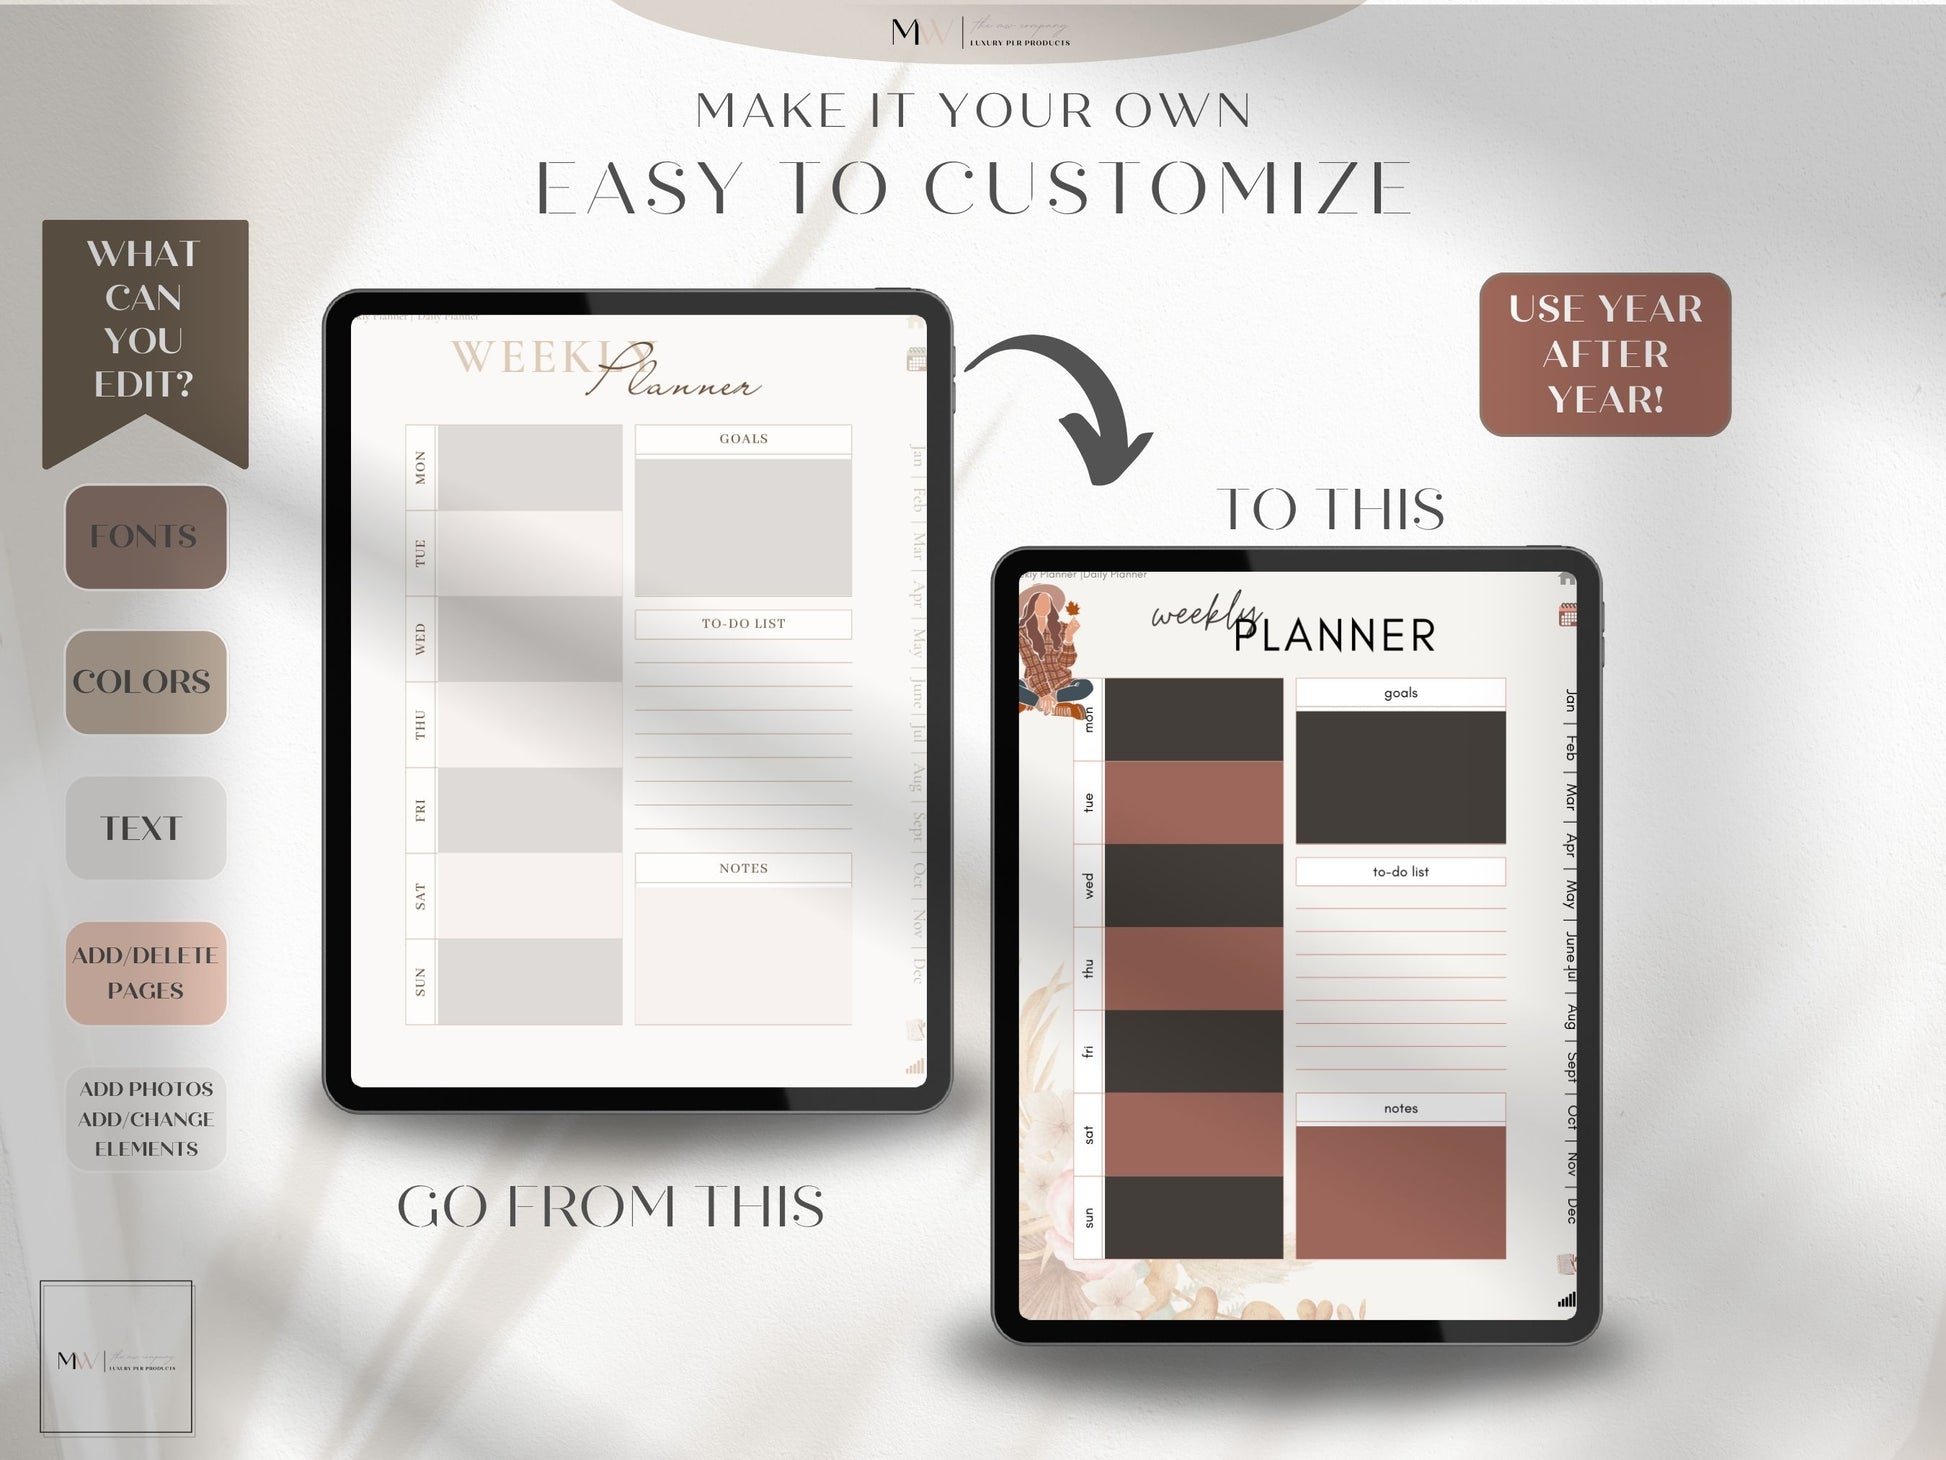 This shows how you can edit the pages to look how you want them to look. It says that is is easy to customize and that it can be used year after year. You can edit fonts, colors, text, pages and photos.